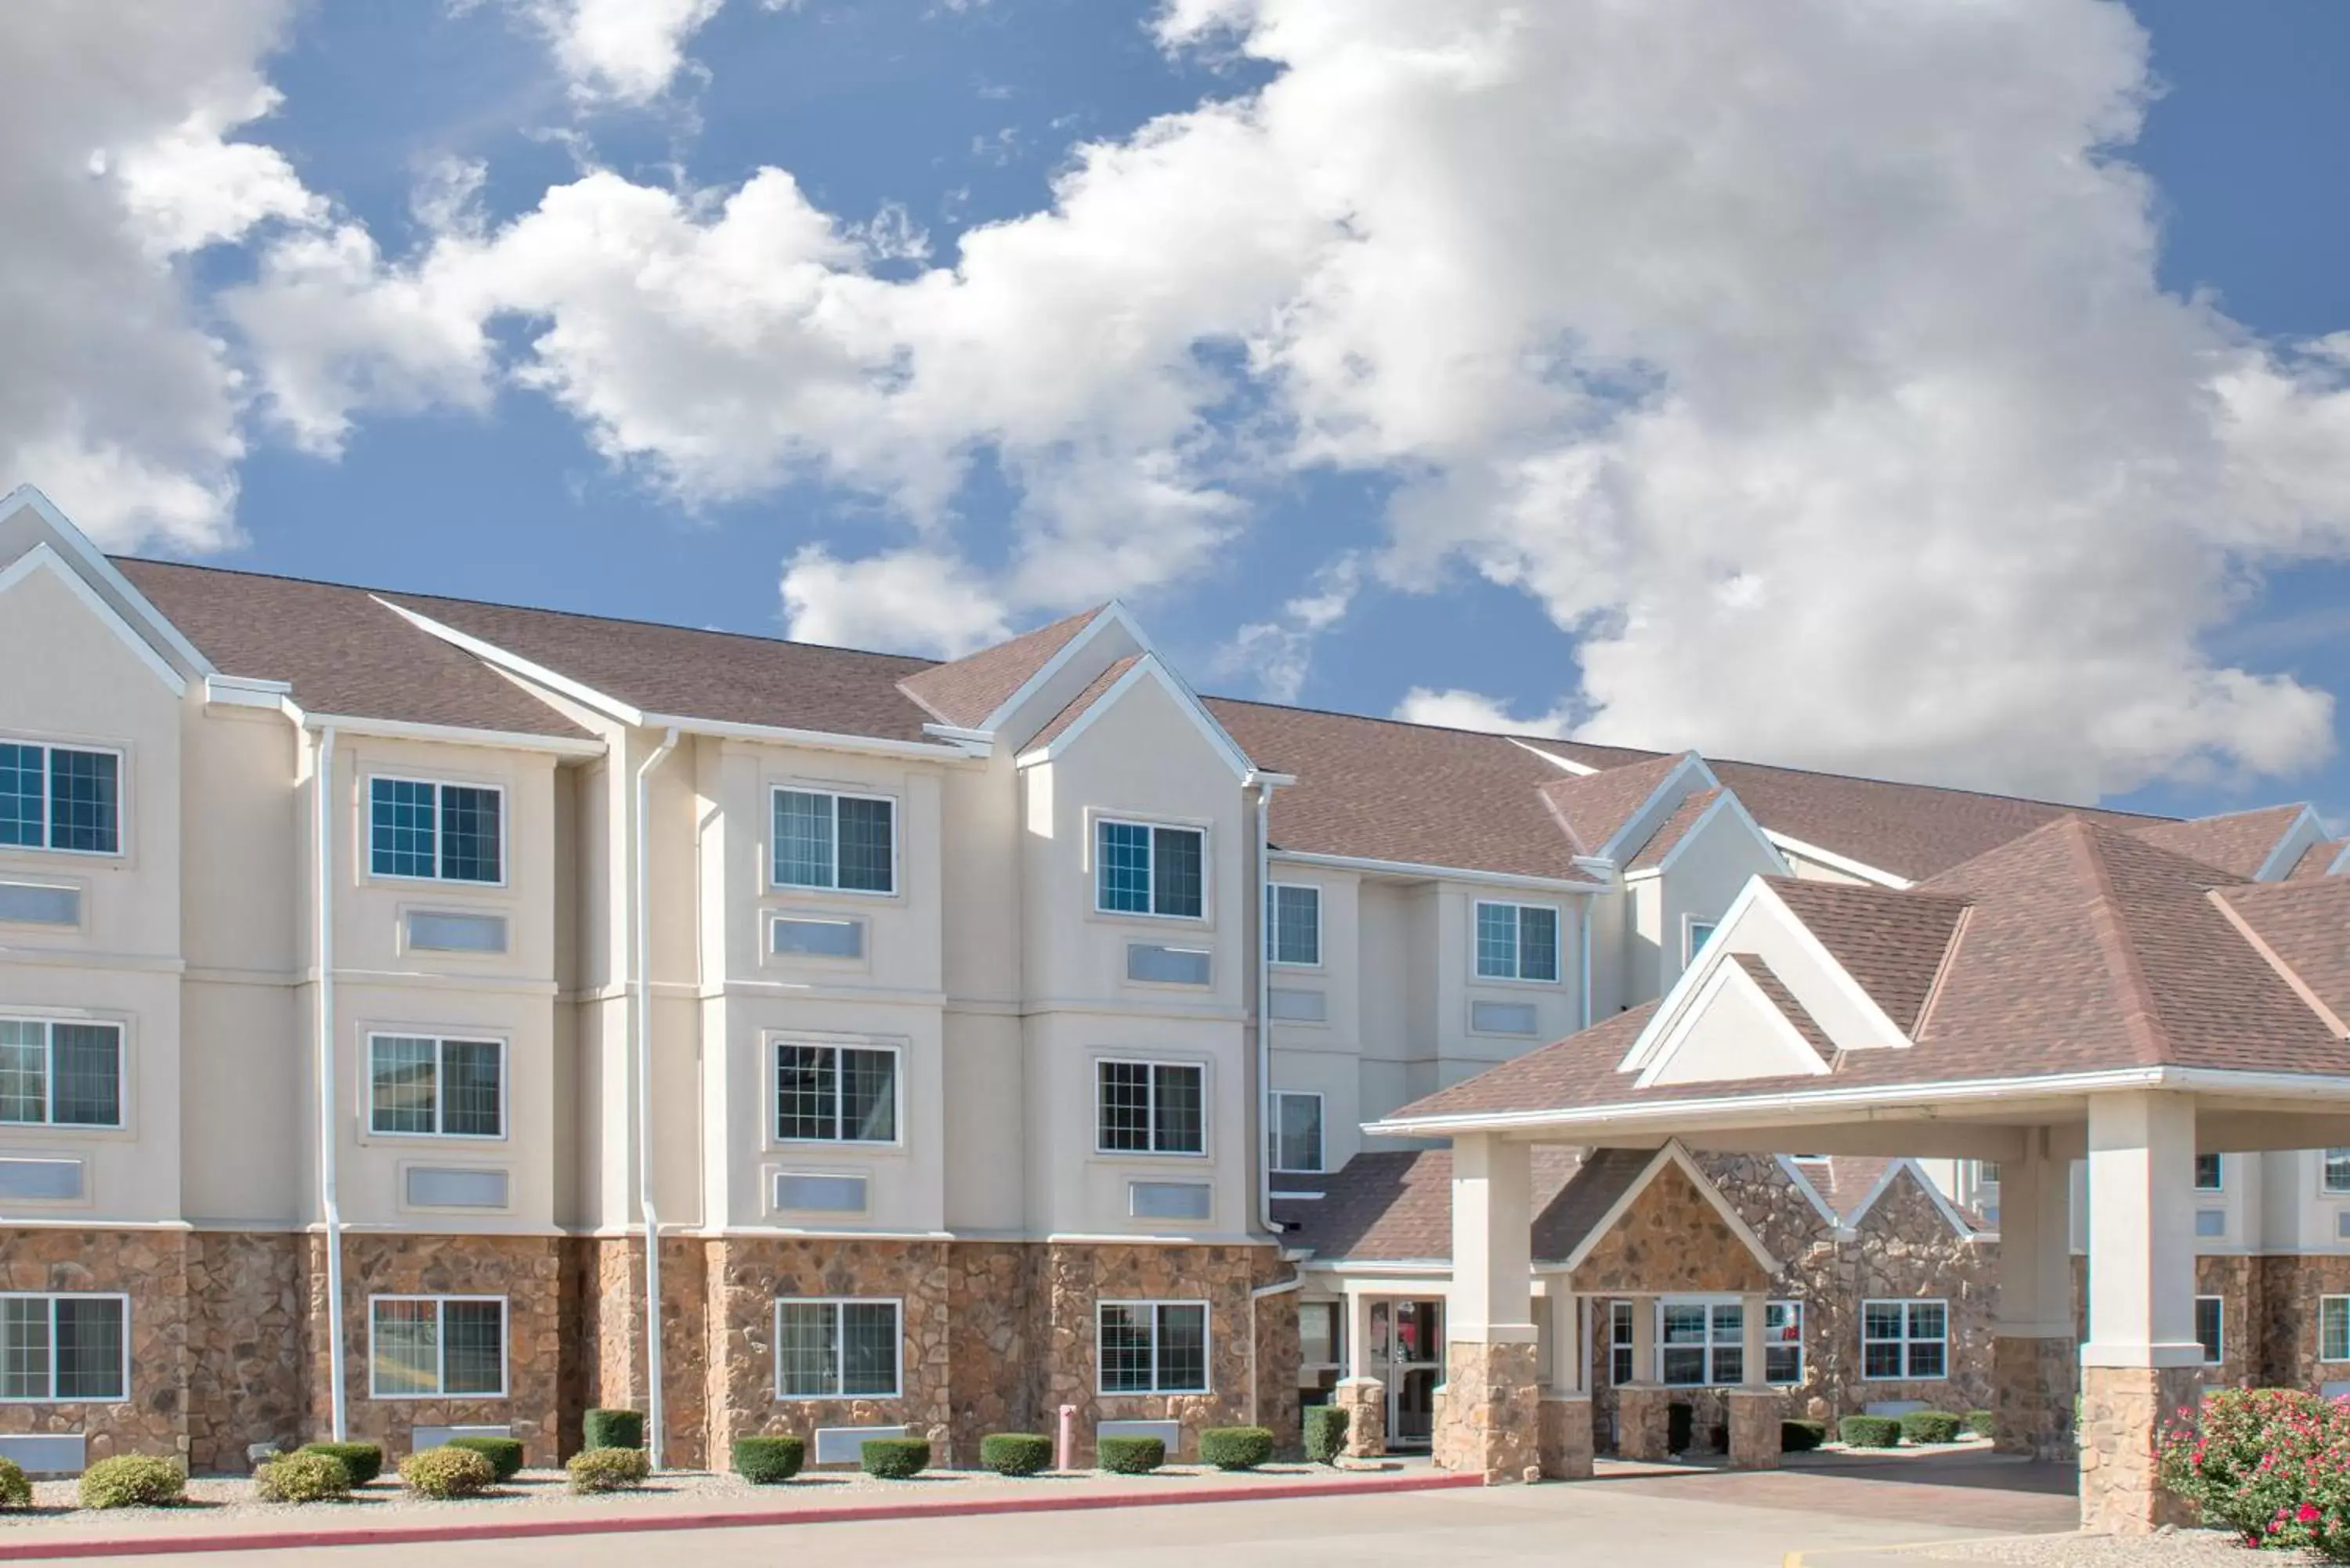 People, Property Building in Microtel Inn & Suites Quincy by Wyndham